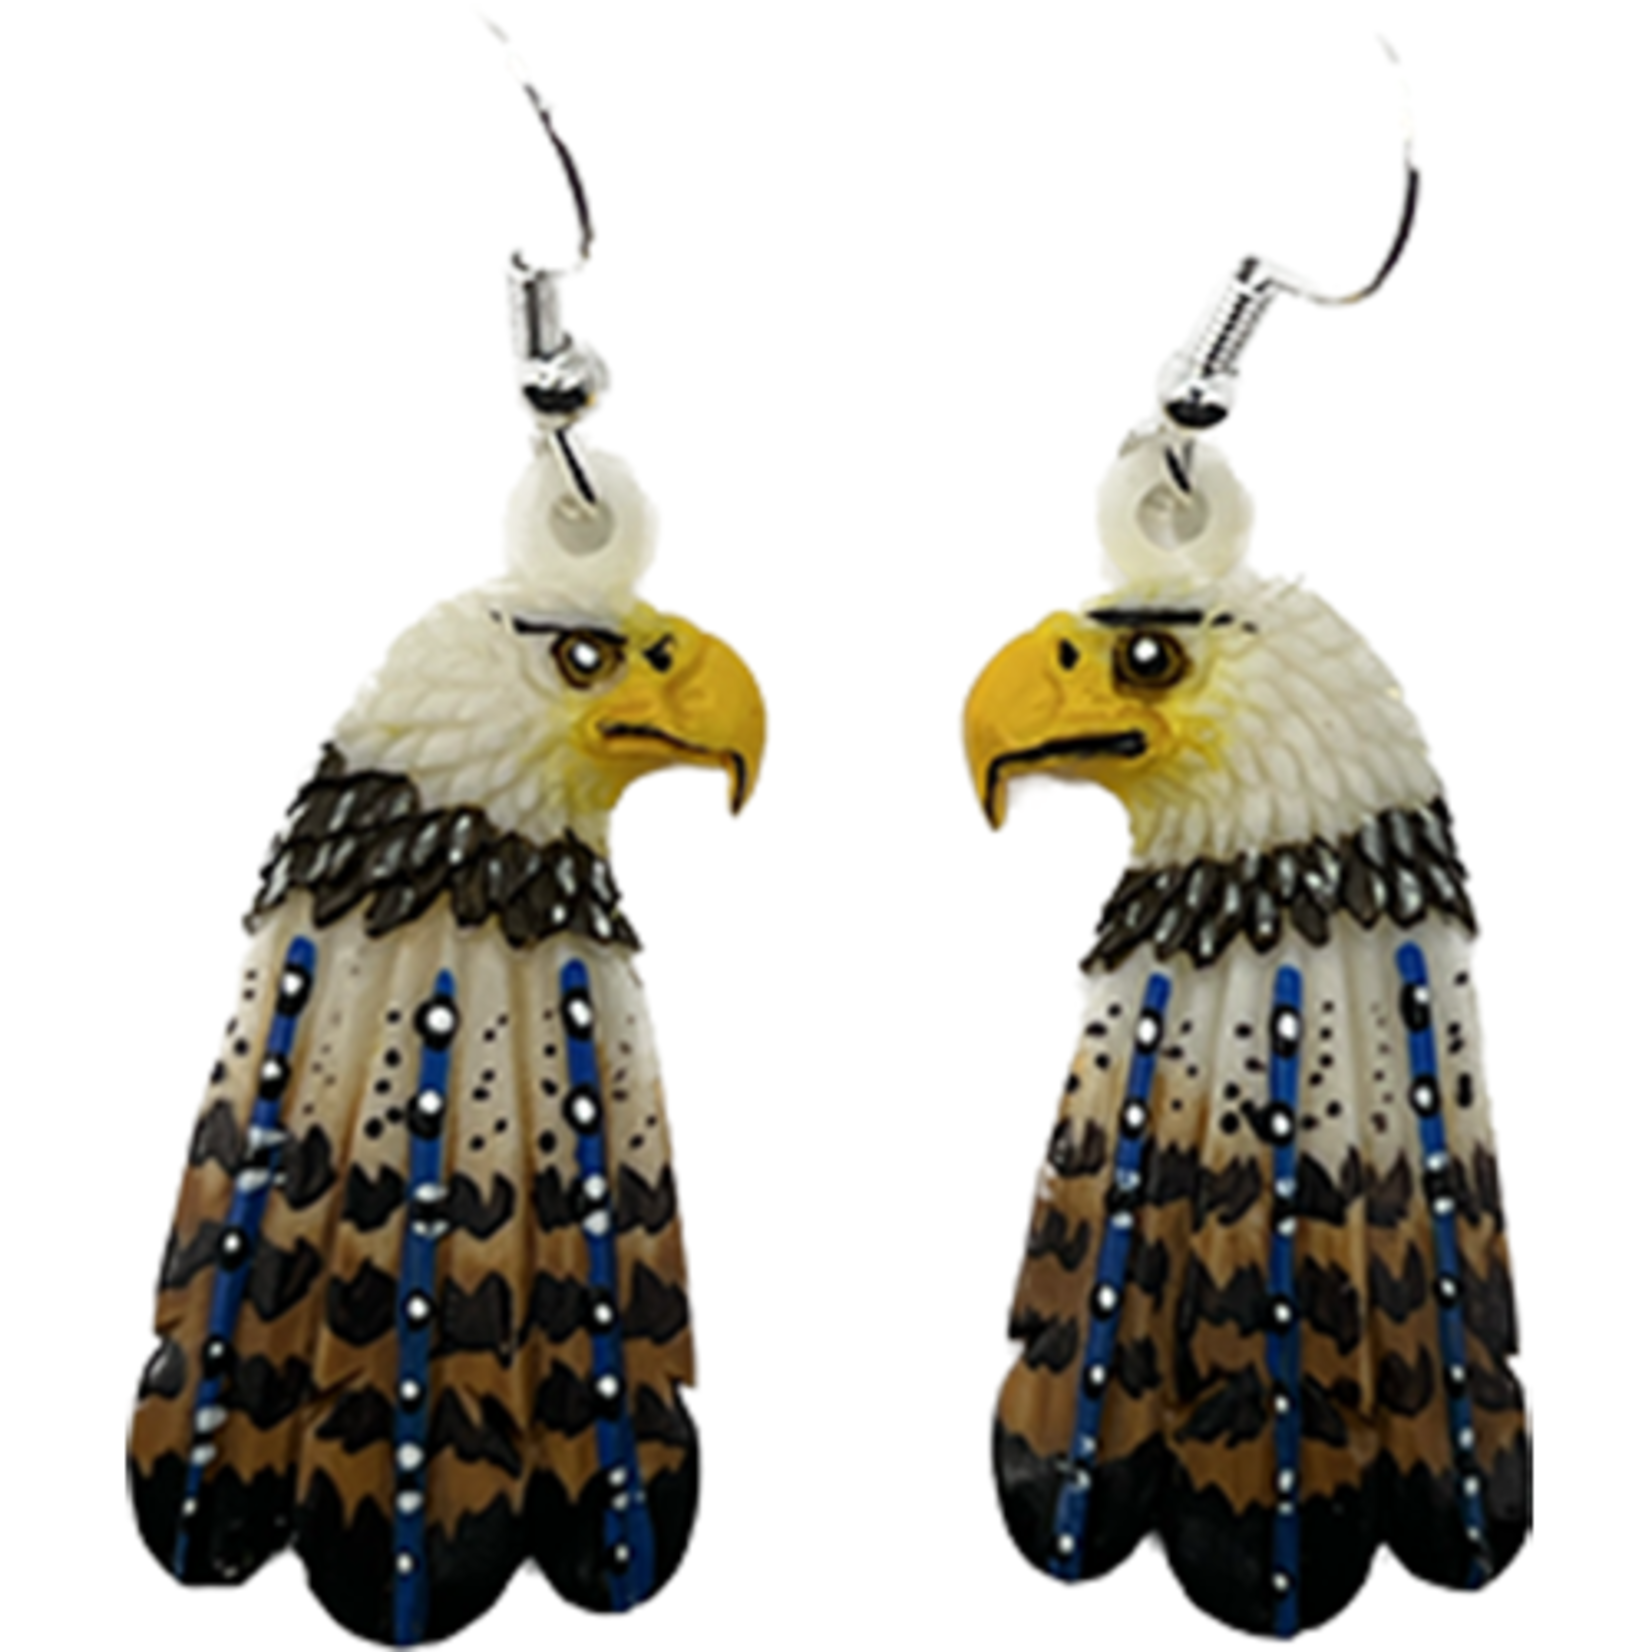 CARVED BONE EARRING - EAGLE WITH FEATHERS